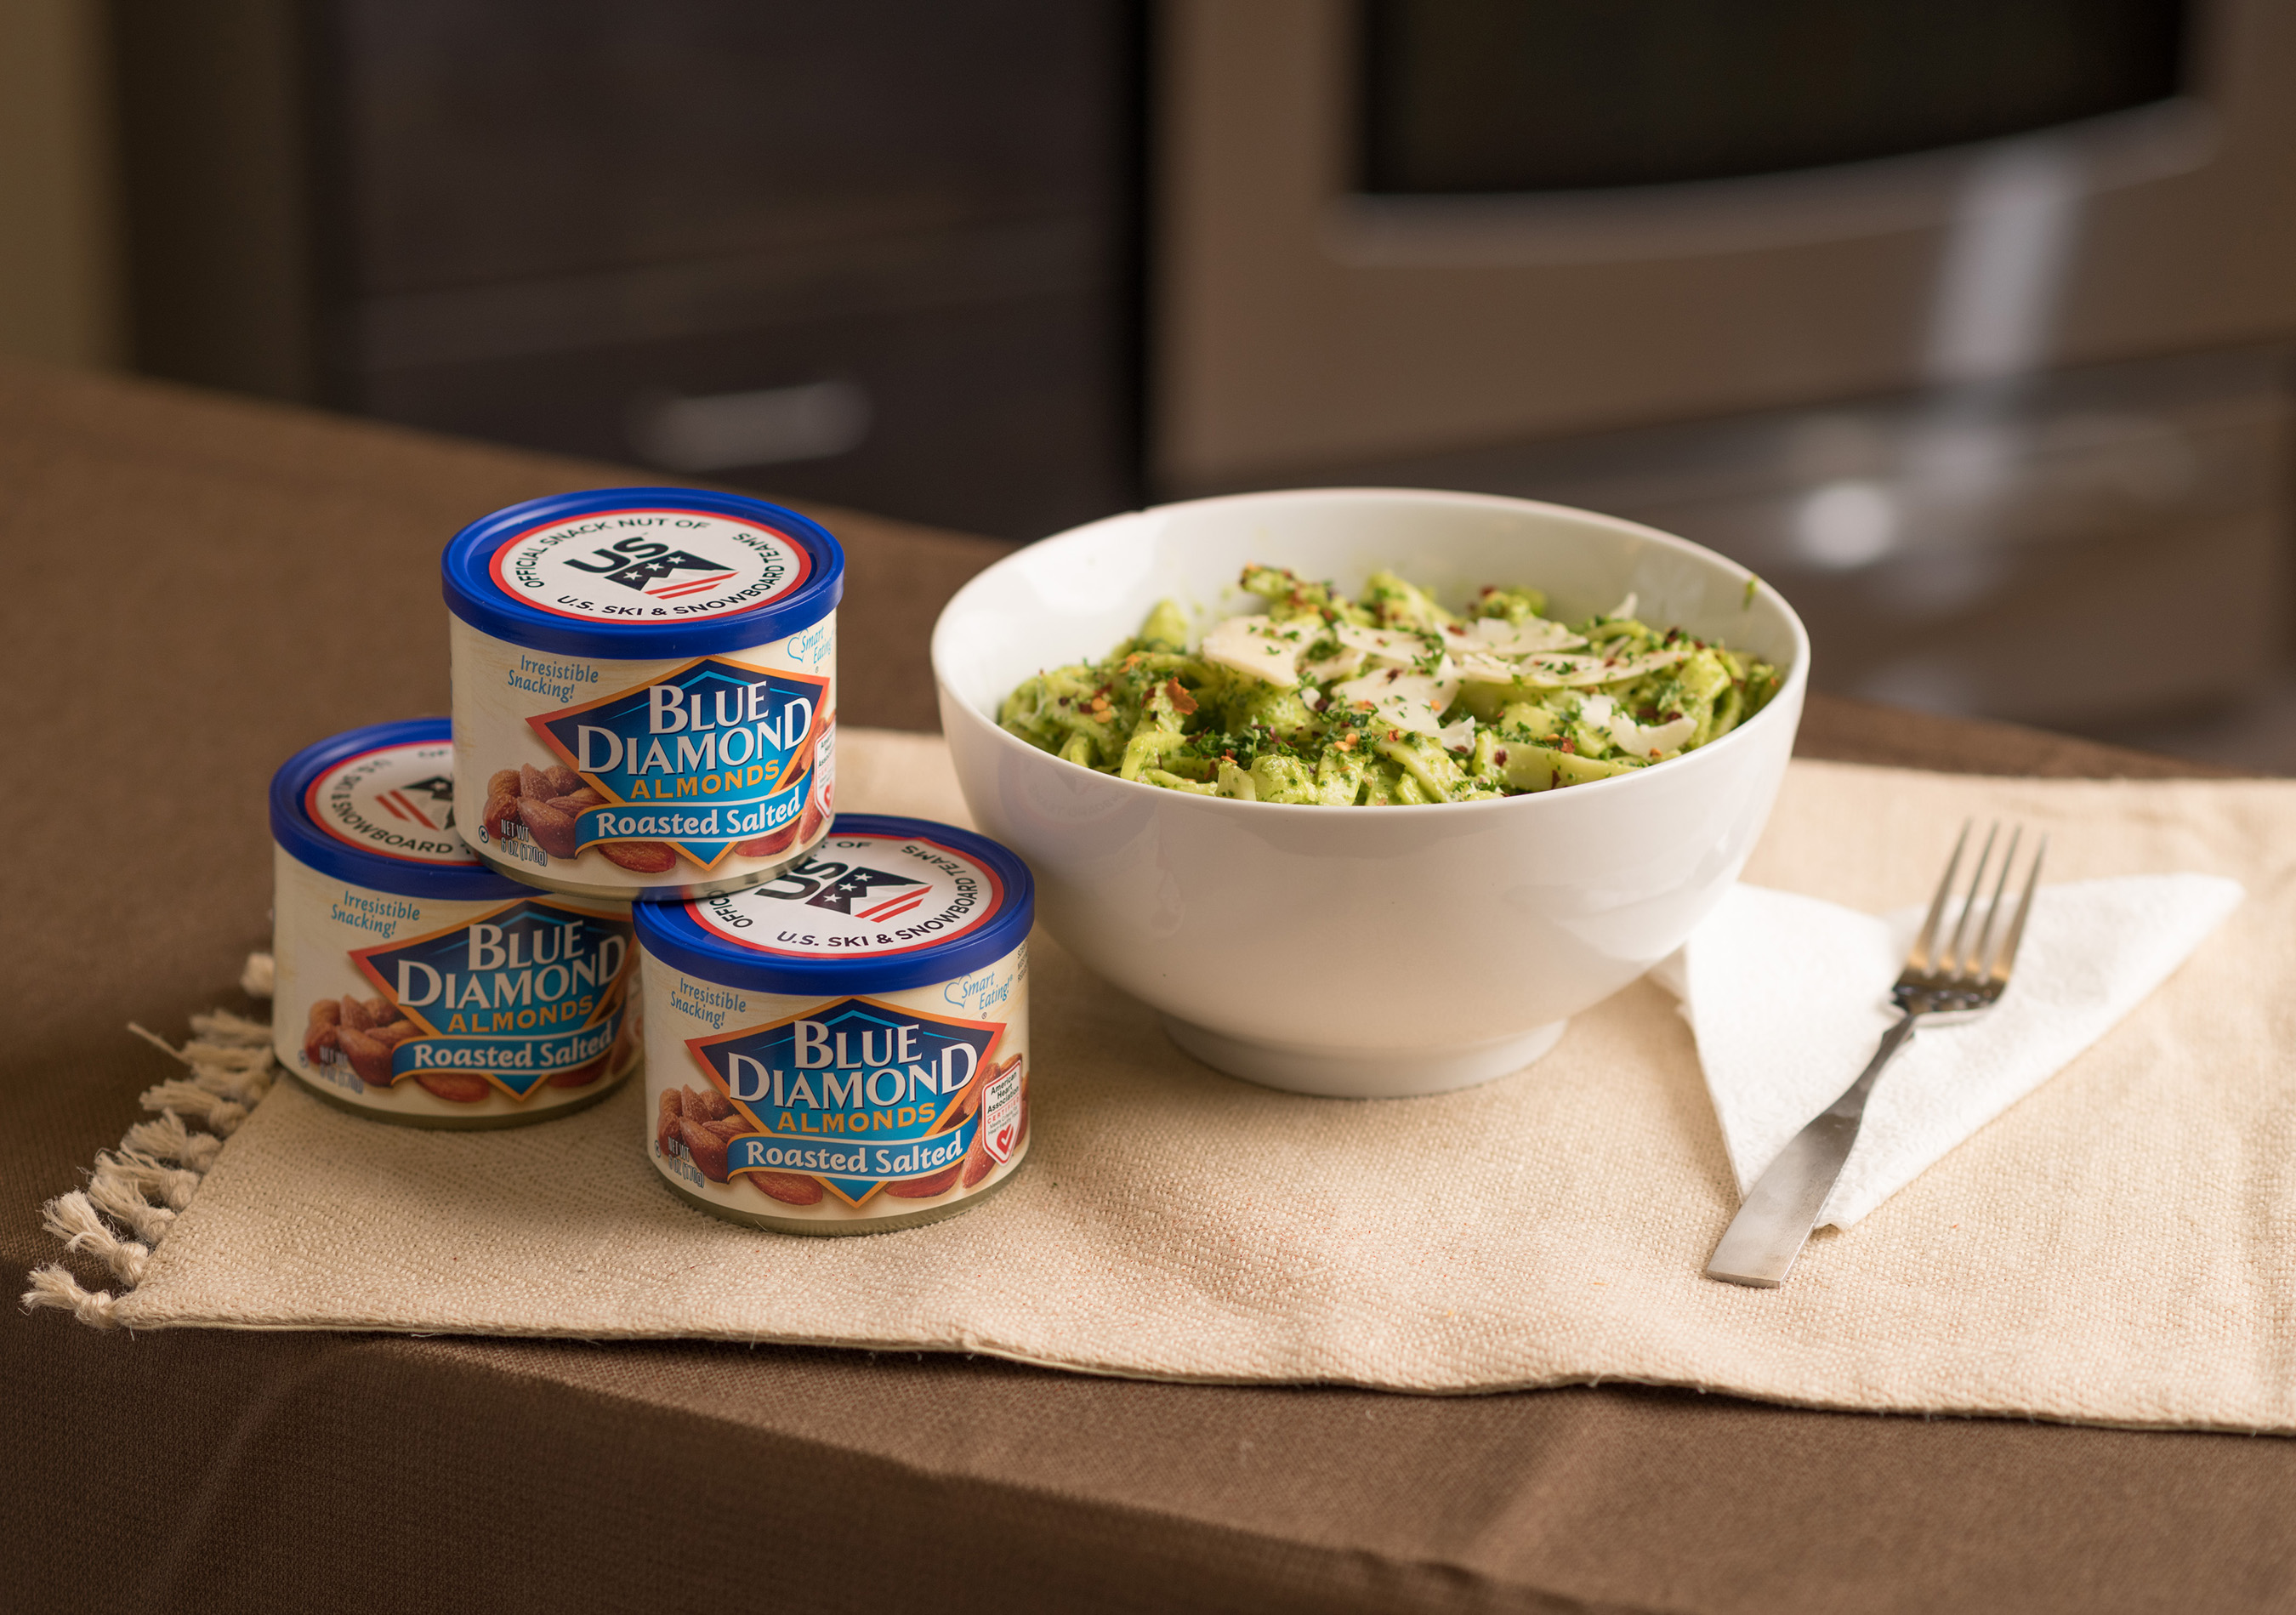 Featuring Blue Diamond Roasted Salted almonds, this Kale Almond Pesto Pasta has a bold, savory flavor that the athletes gravitate to.